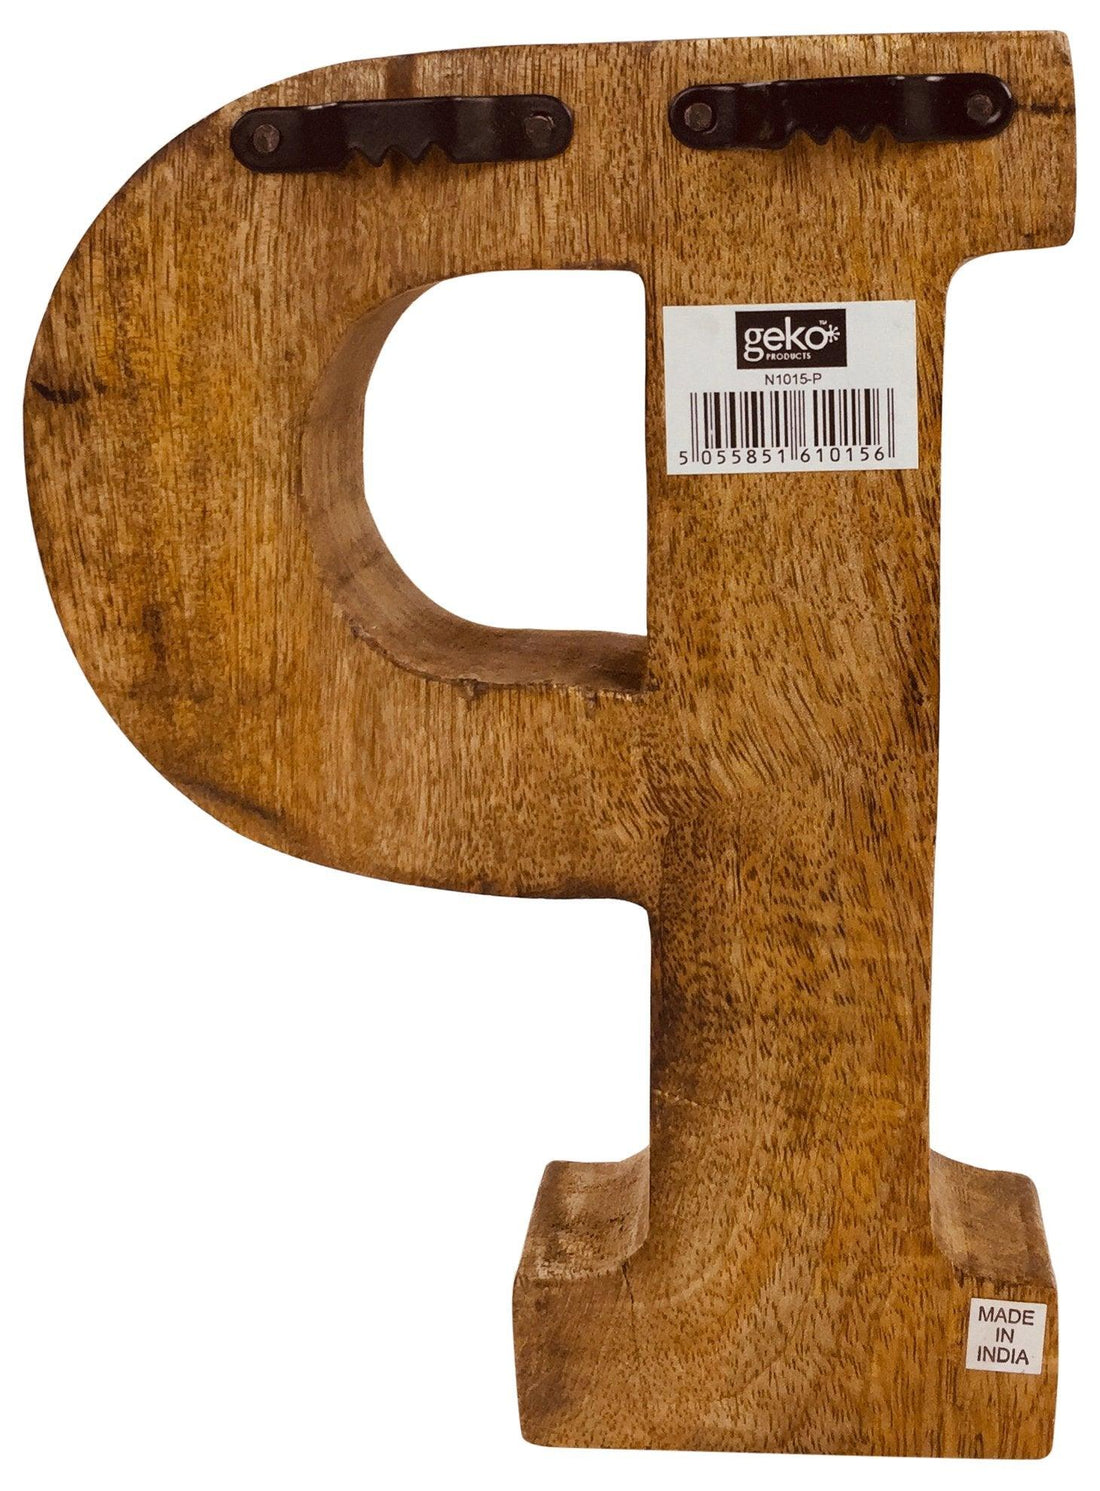 Hand Carved Wooden Geometric Letter P - £12.99 - Single Letters 